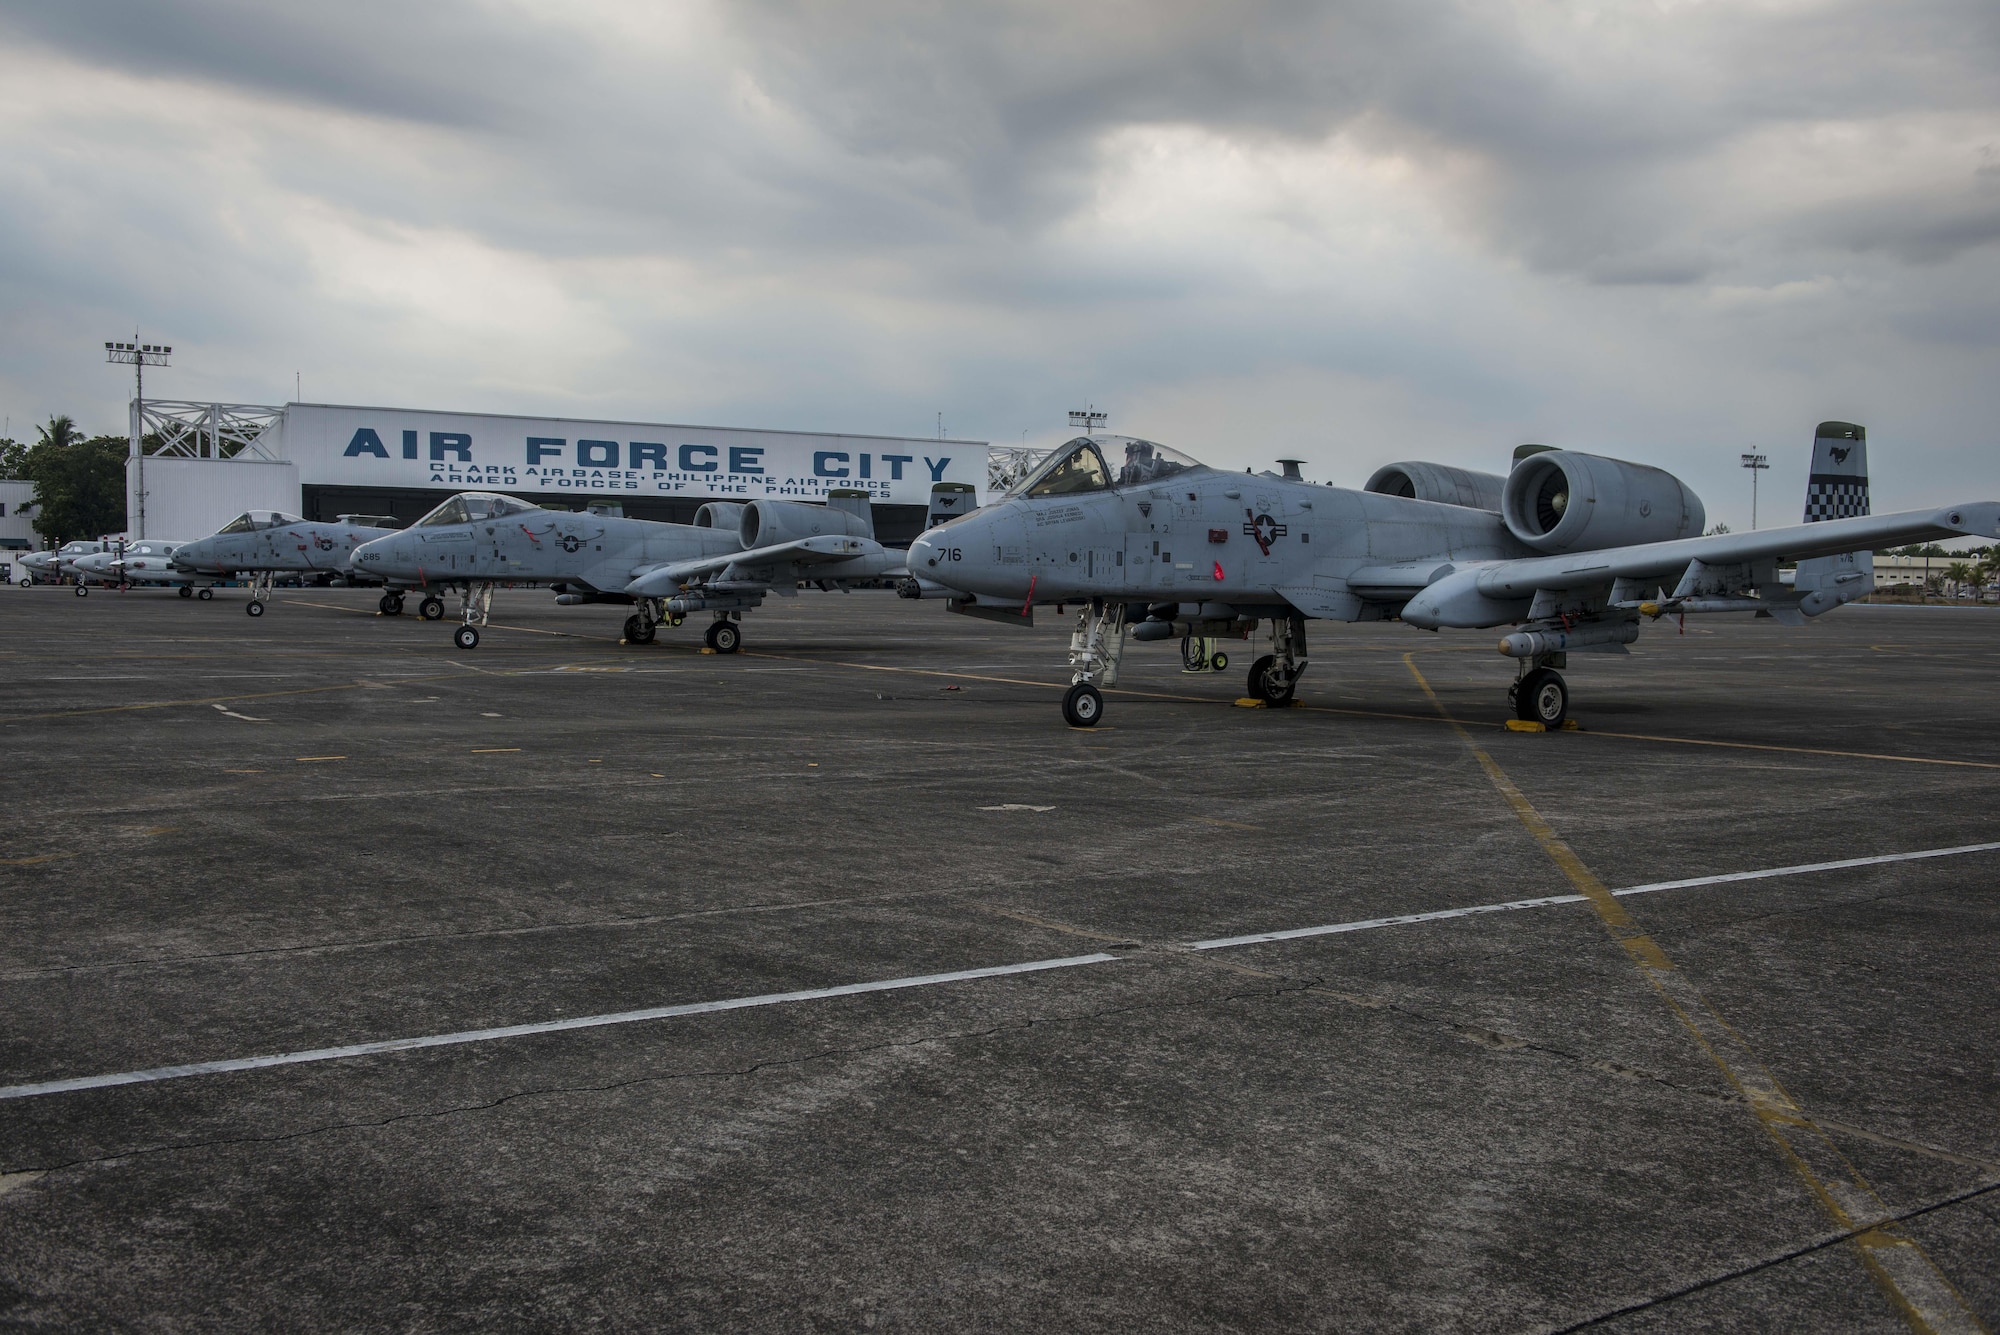 Three of five U.S. Air Force A-10C Thunderbolt IIs, with the 51st Fighter Wing, Osan Air Base, Republic of Korea, sit on the flight line of Clark Air Base, Philippines, April 16, 2016, after having flown missions in support of Exercise Balikatan 16. The A-10Cs are part of a newly stood up Air Contingent in the Indo-Asia-Pacific region that provides credible combat forces to the region capable of a variety of mission including force projection, air and maritime domain awareness, personnel recovery, combating piracy, and assuring access to the air and maritime domains in accordance with international law. The A-10Cs were joined by three HH-60G Pavehawks and approximately 200 Pacific Air Forces personnel including aircrew, maintainers, logistics and support personnel. (U.S. Air Force photo by Staff Sgt. Benjamin W. Stratton)